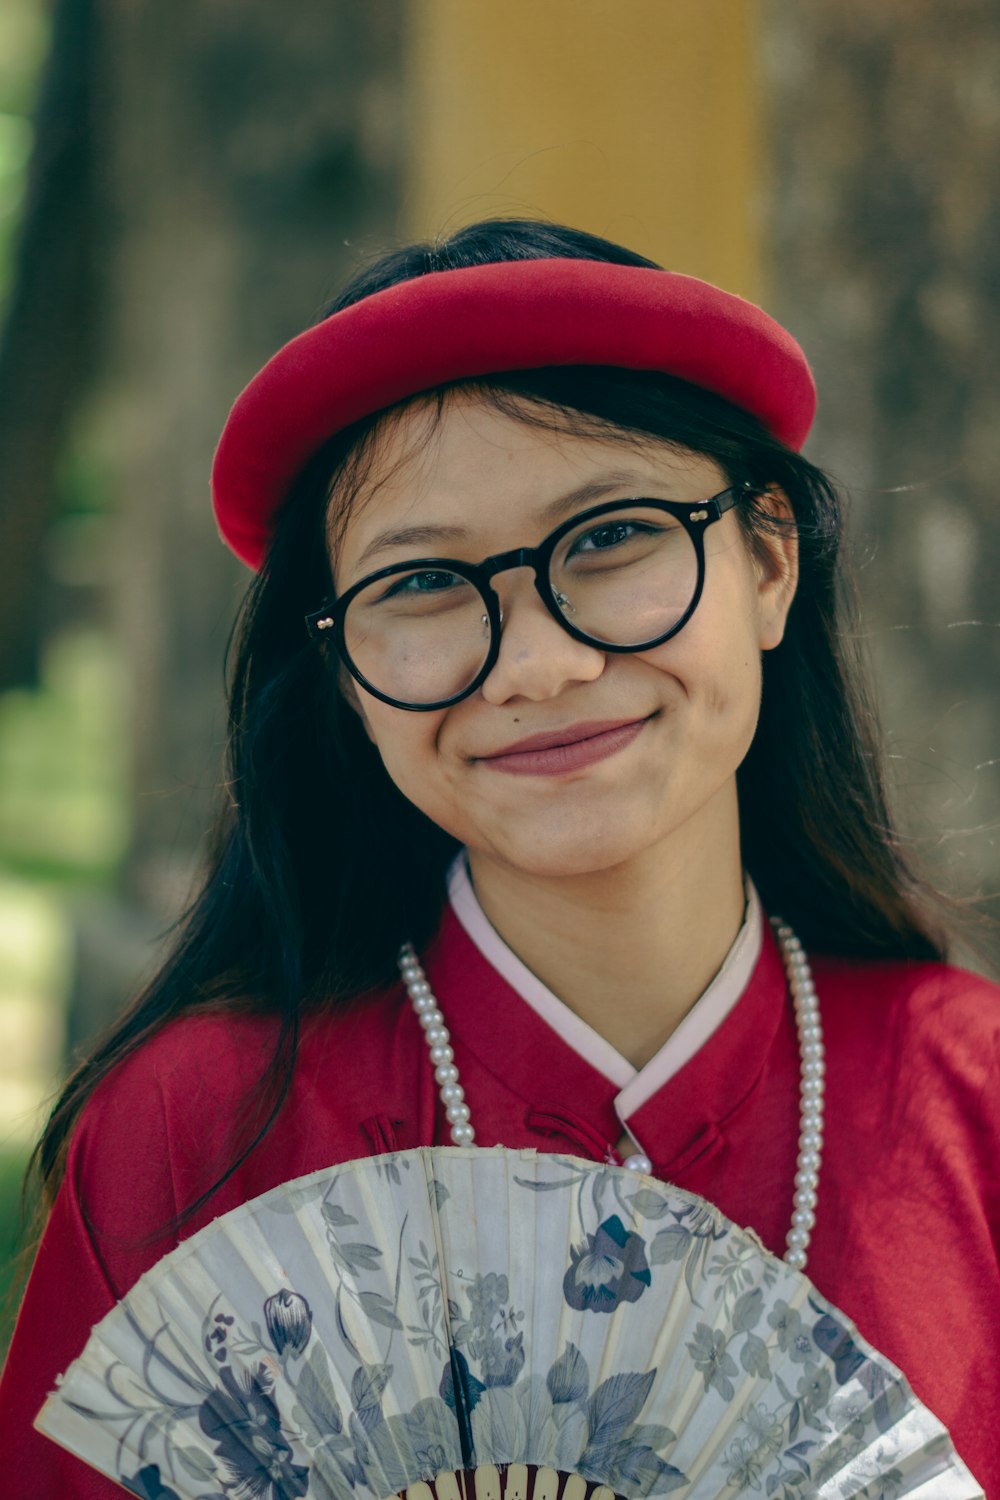 a young girl wearing glasses and a red hat holding a fan